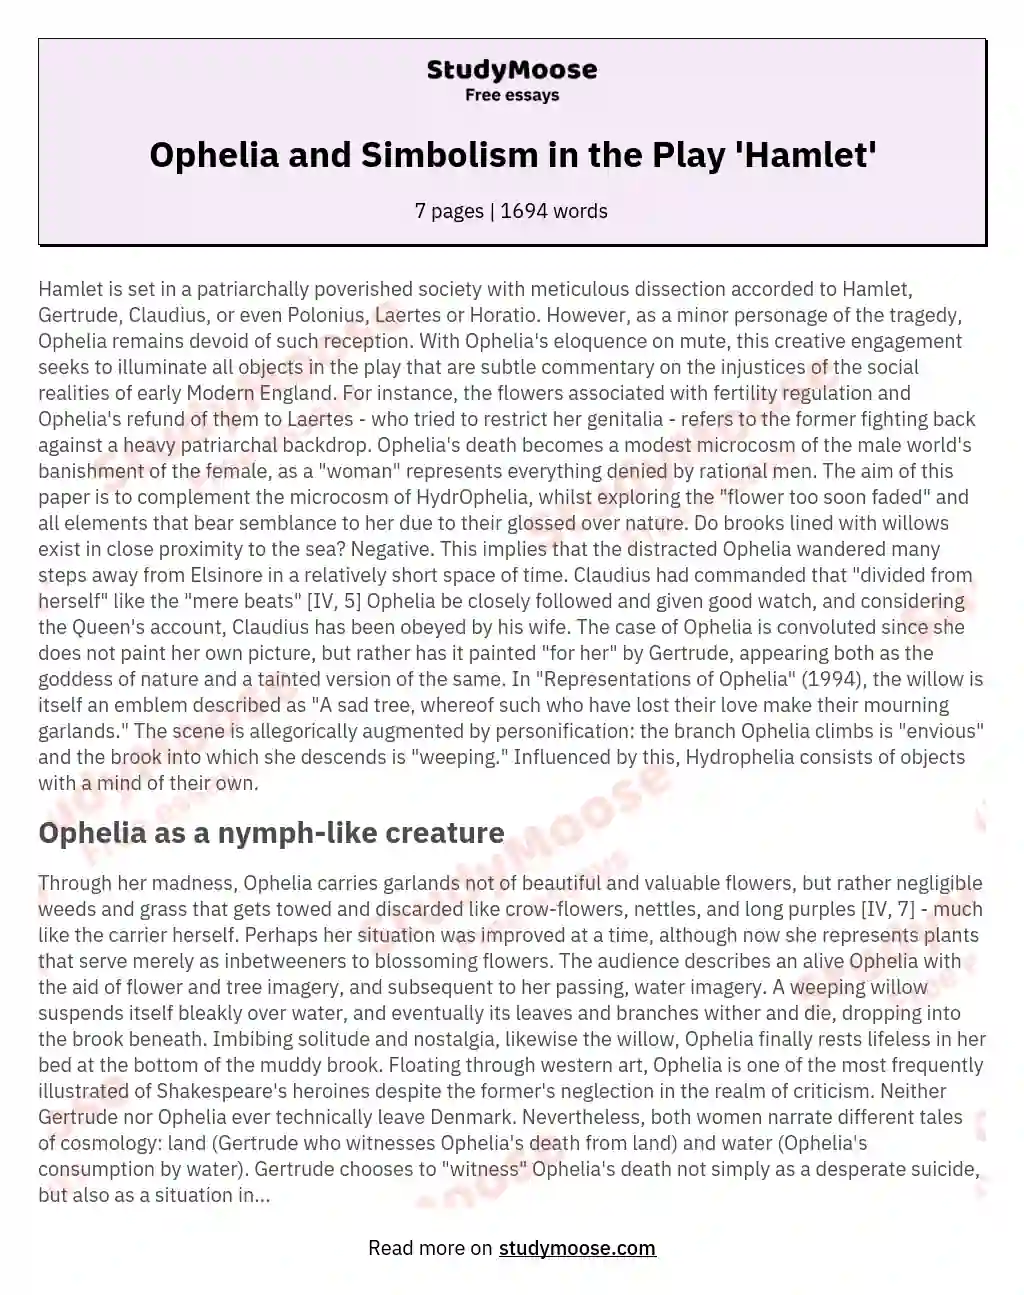 Ophelia and Simbolism in the Play 'Hamlet'